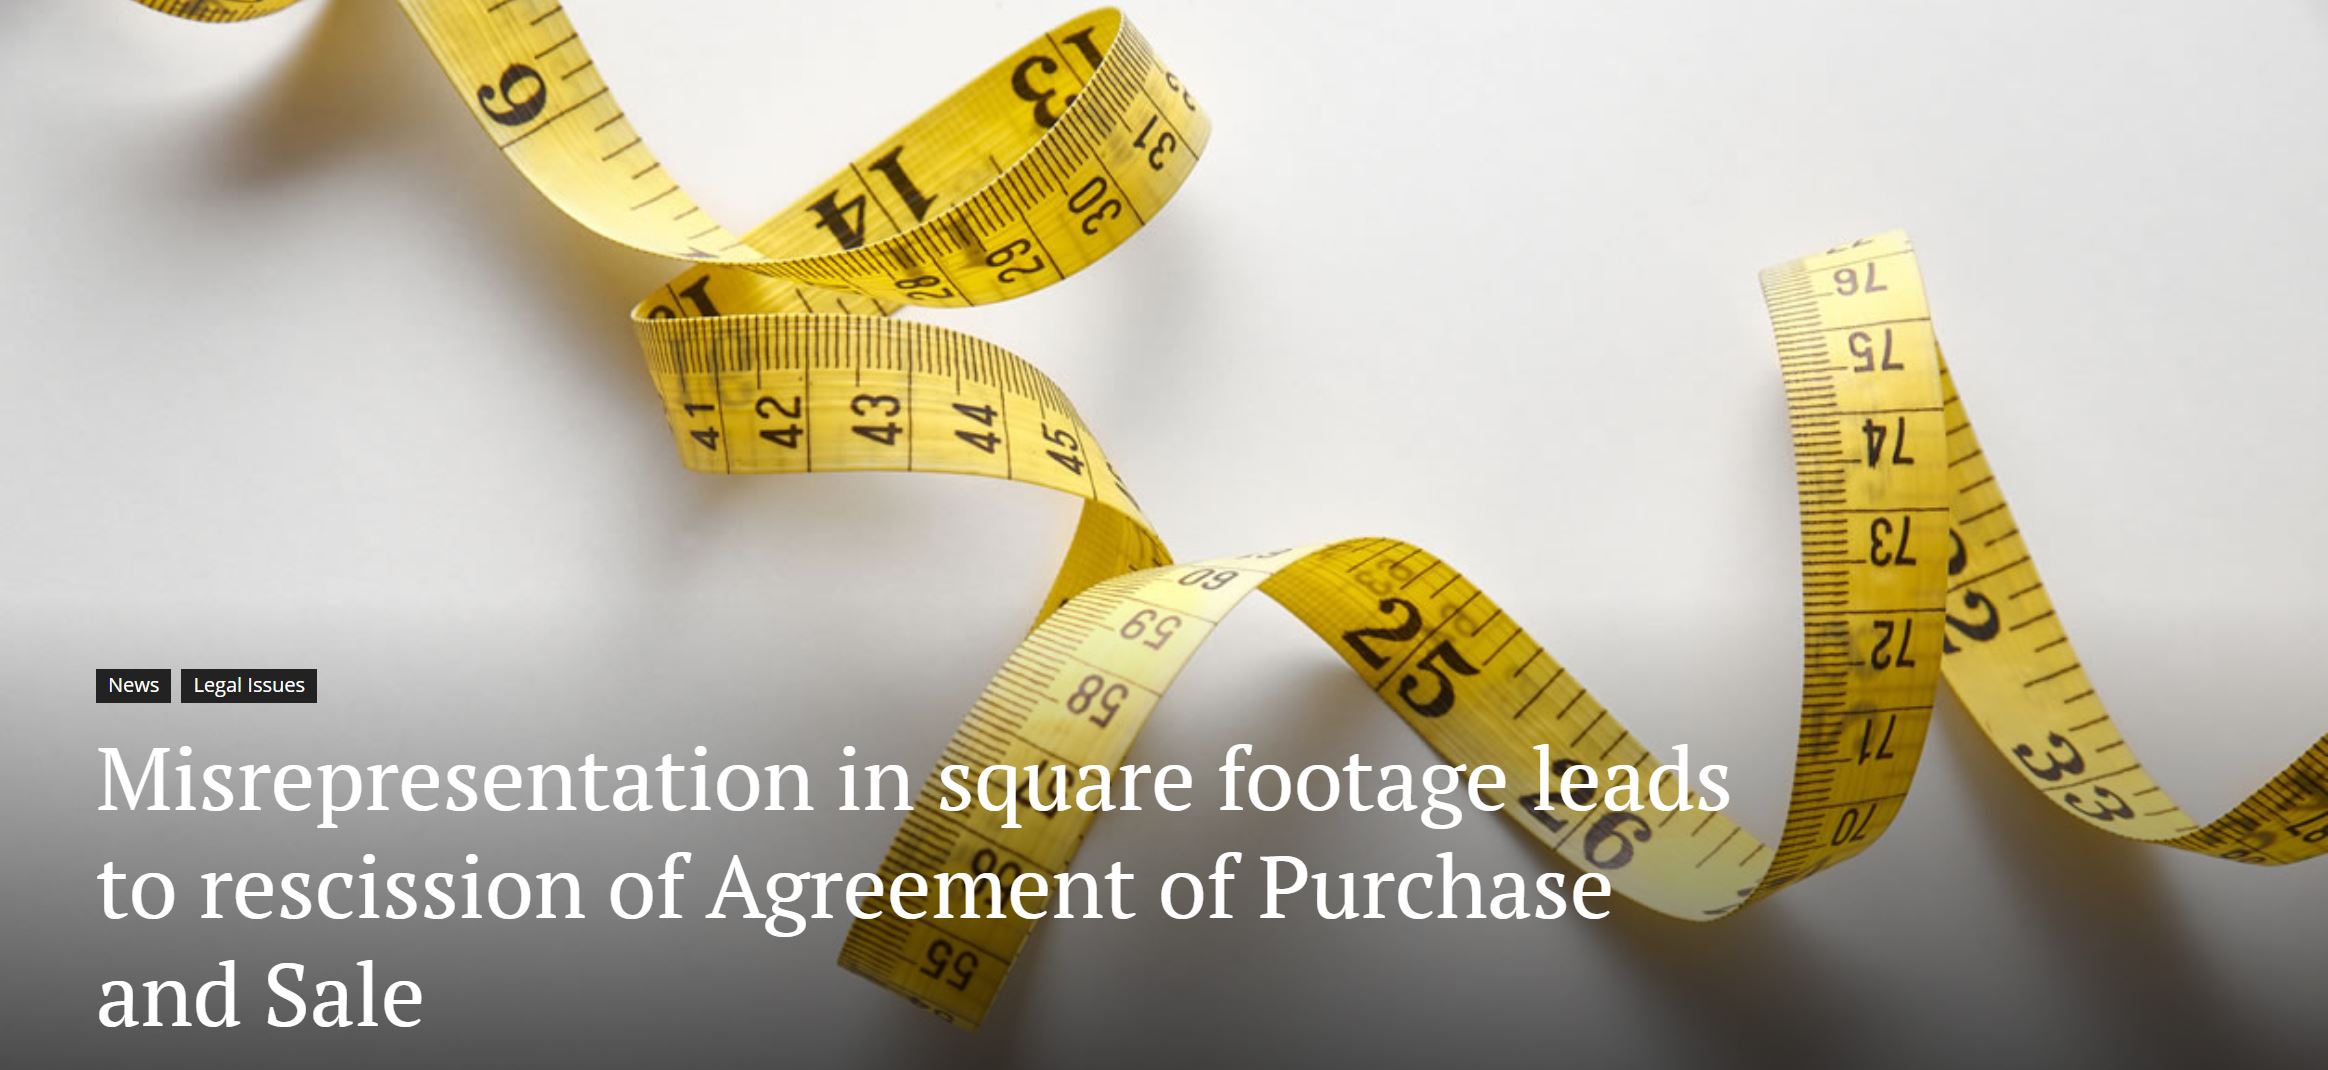 Misrepresentation in square footage leads to rescission of Agreement of Purchase and Sale